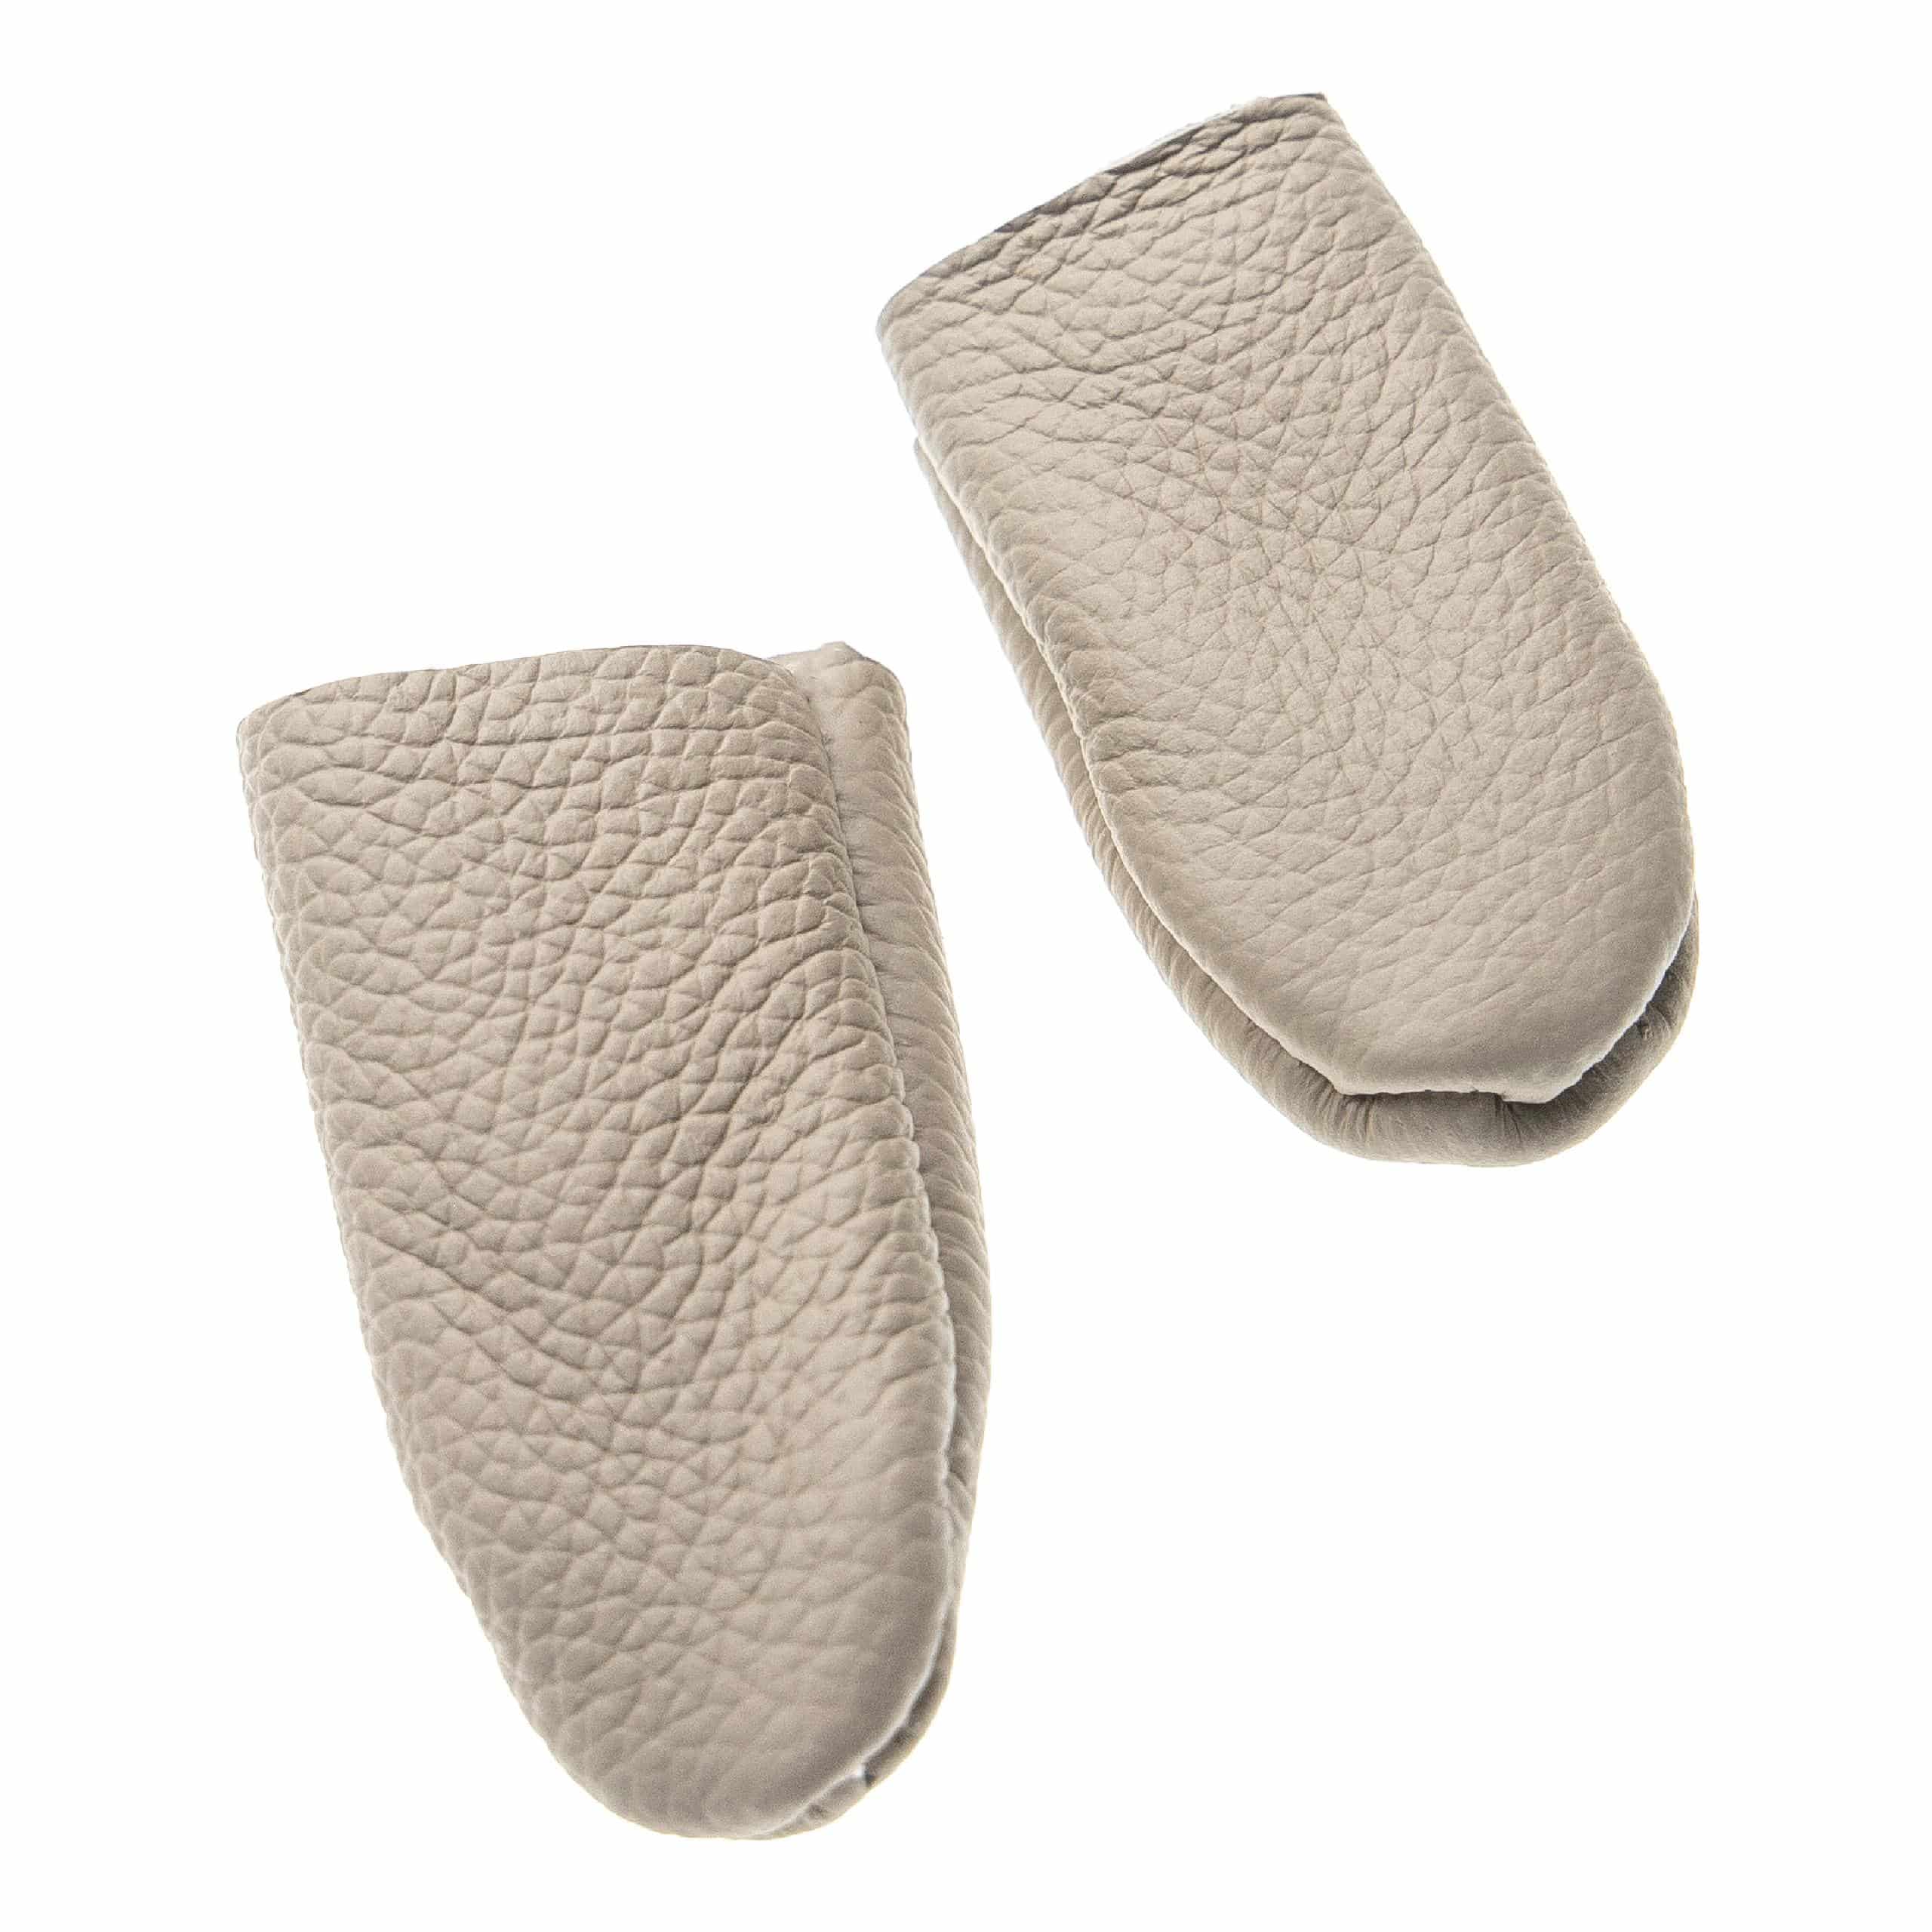 vhbw Finger Protector for Sewing, Spinning, Carving etc. - 2-Piece Set (Thumb Stall + Index Finger Stall), Lea